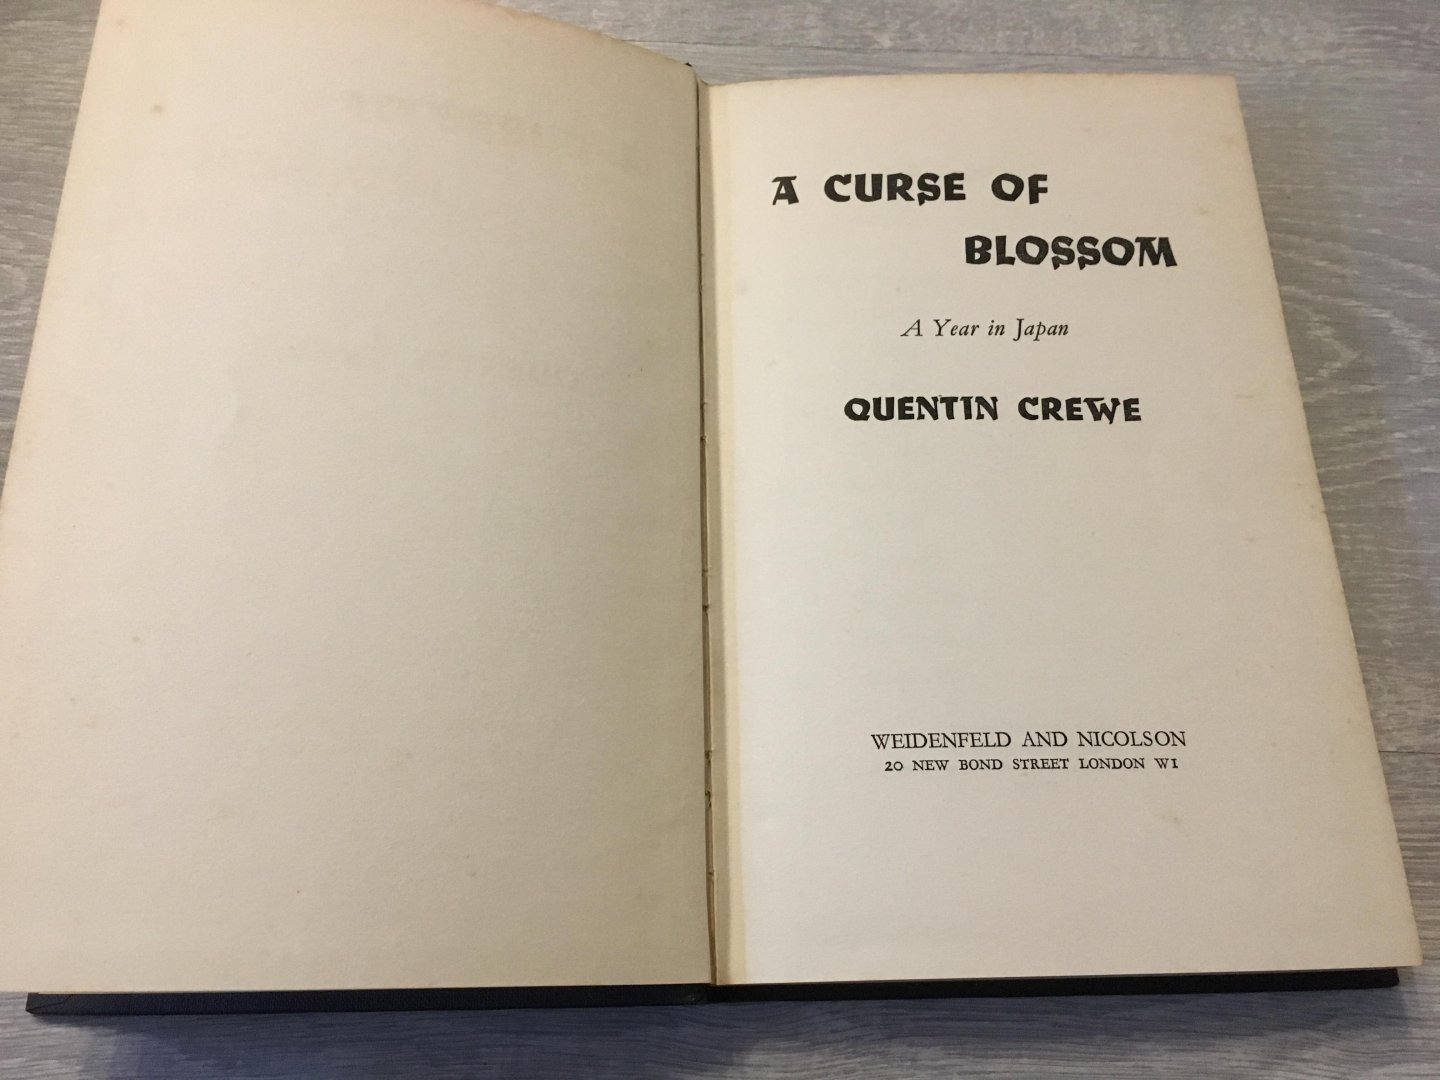 Quentin Crewe - A curse of blossom, A year in Japan